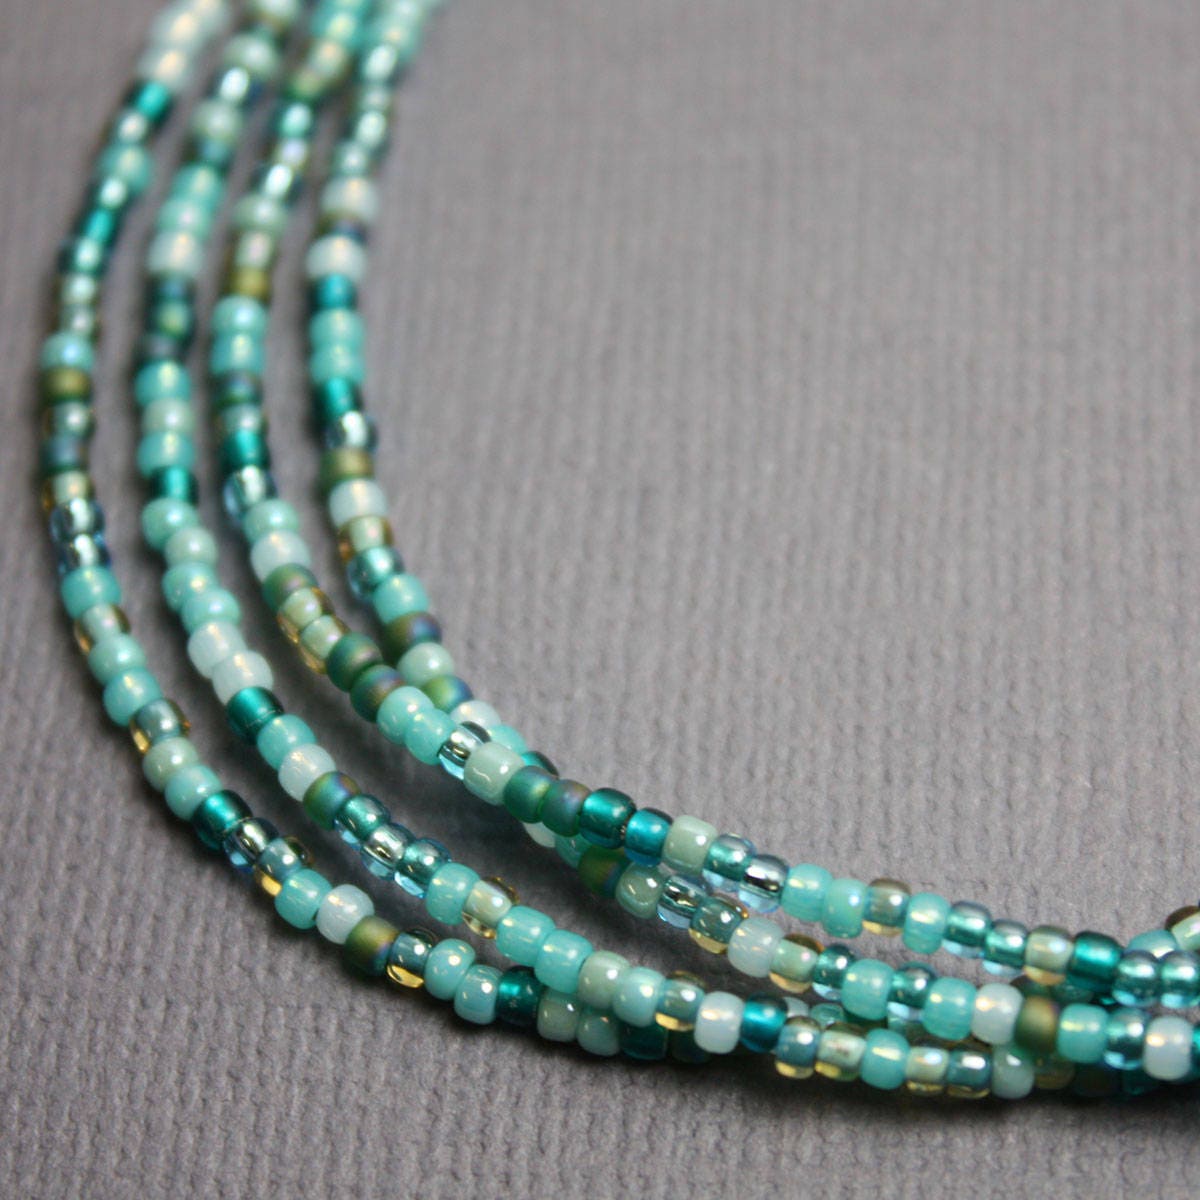 Blue Green Seed Bead Necklace Long Blue Green Seed Bead | Etsy